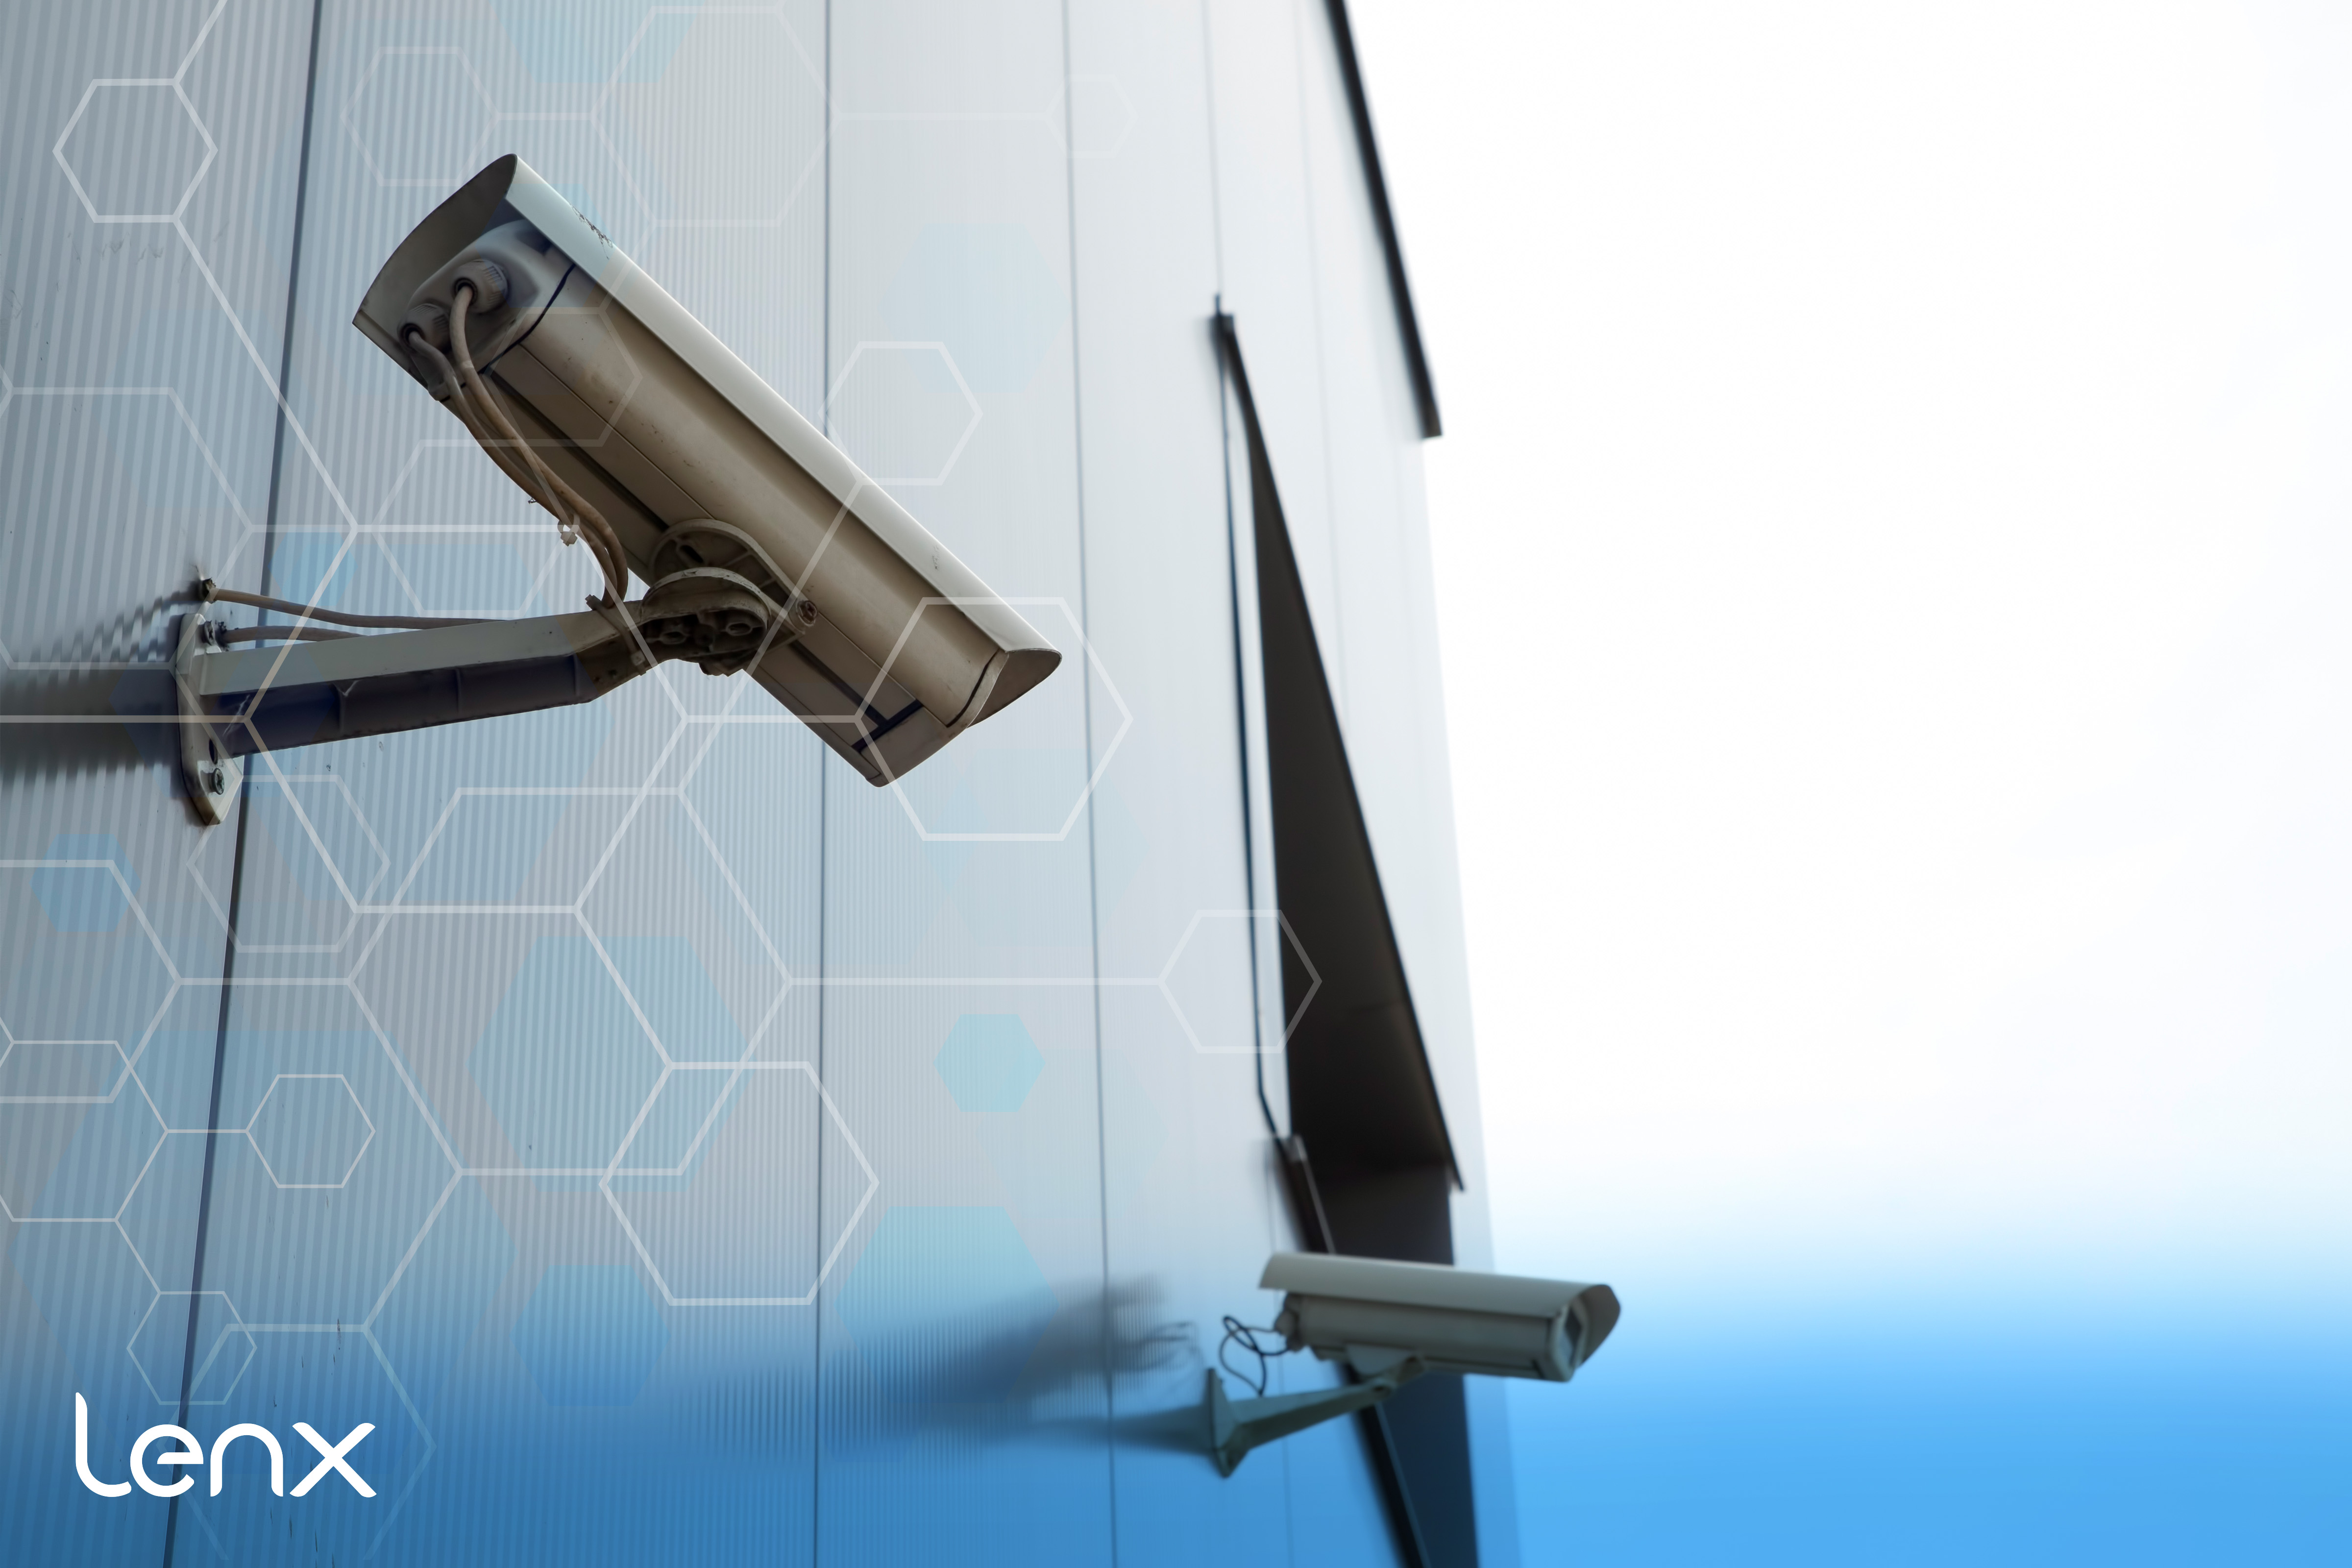 Turning Your Cameras Into Proactive Tools Using AI Security, Active Shooter Detection